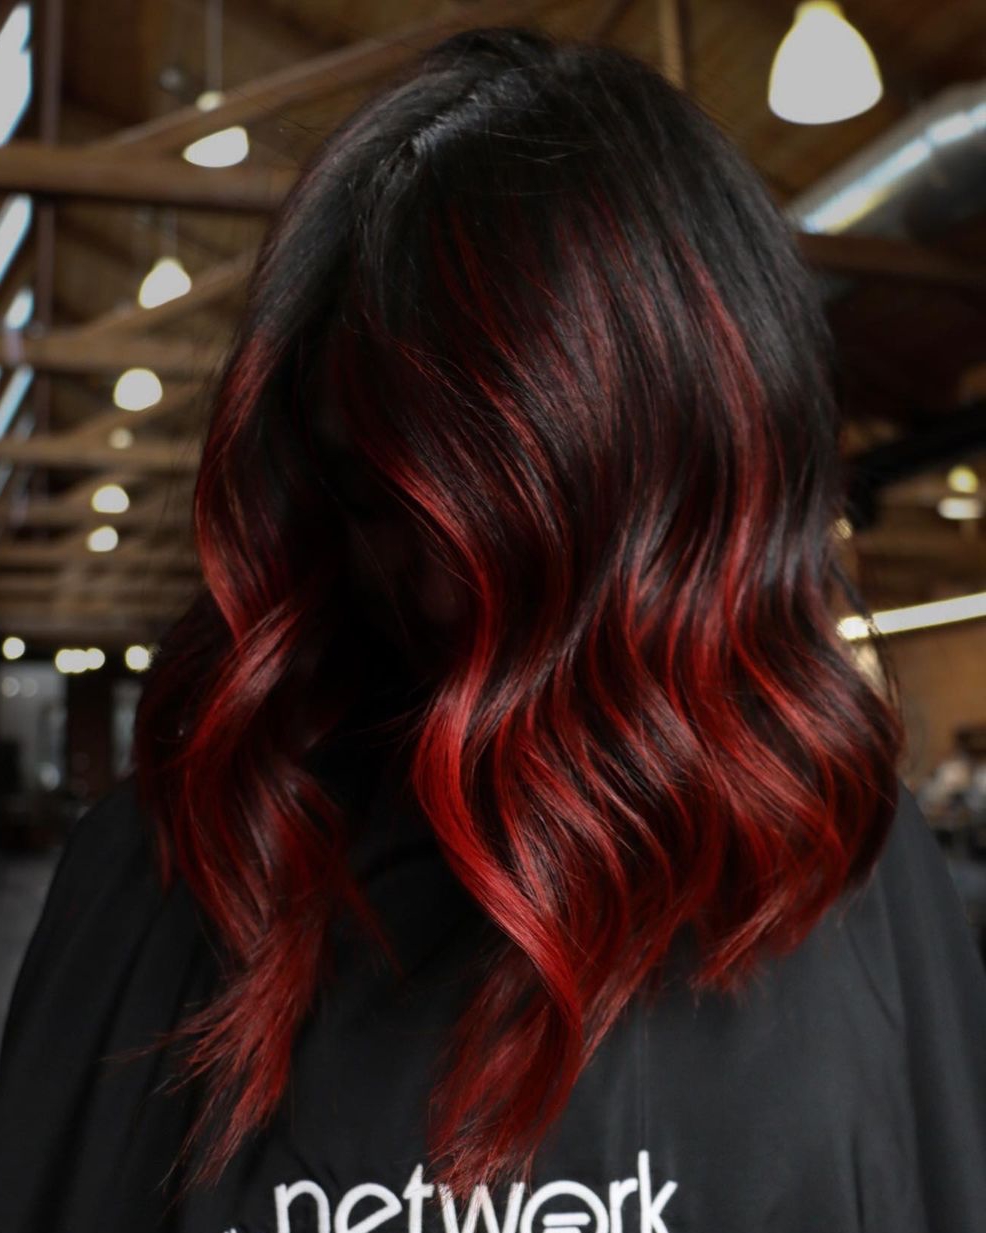 Black to Red Ombre on Bob Cut